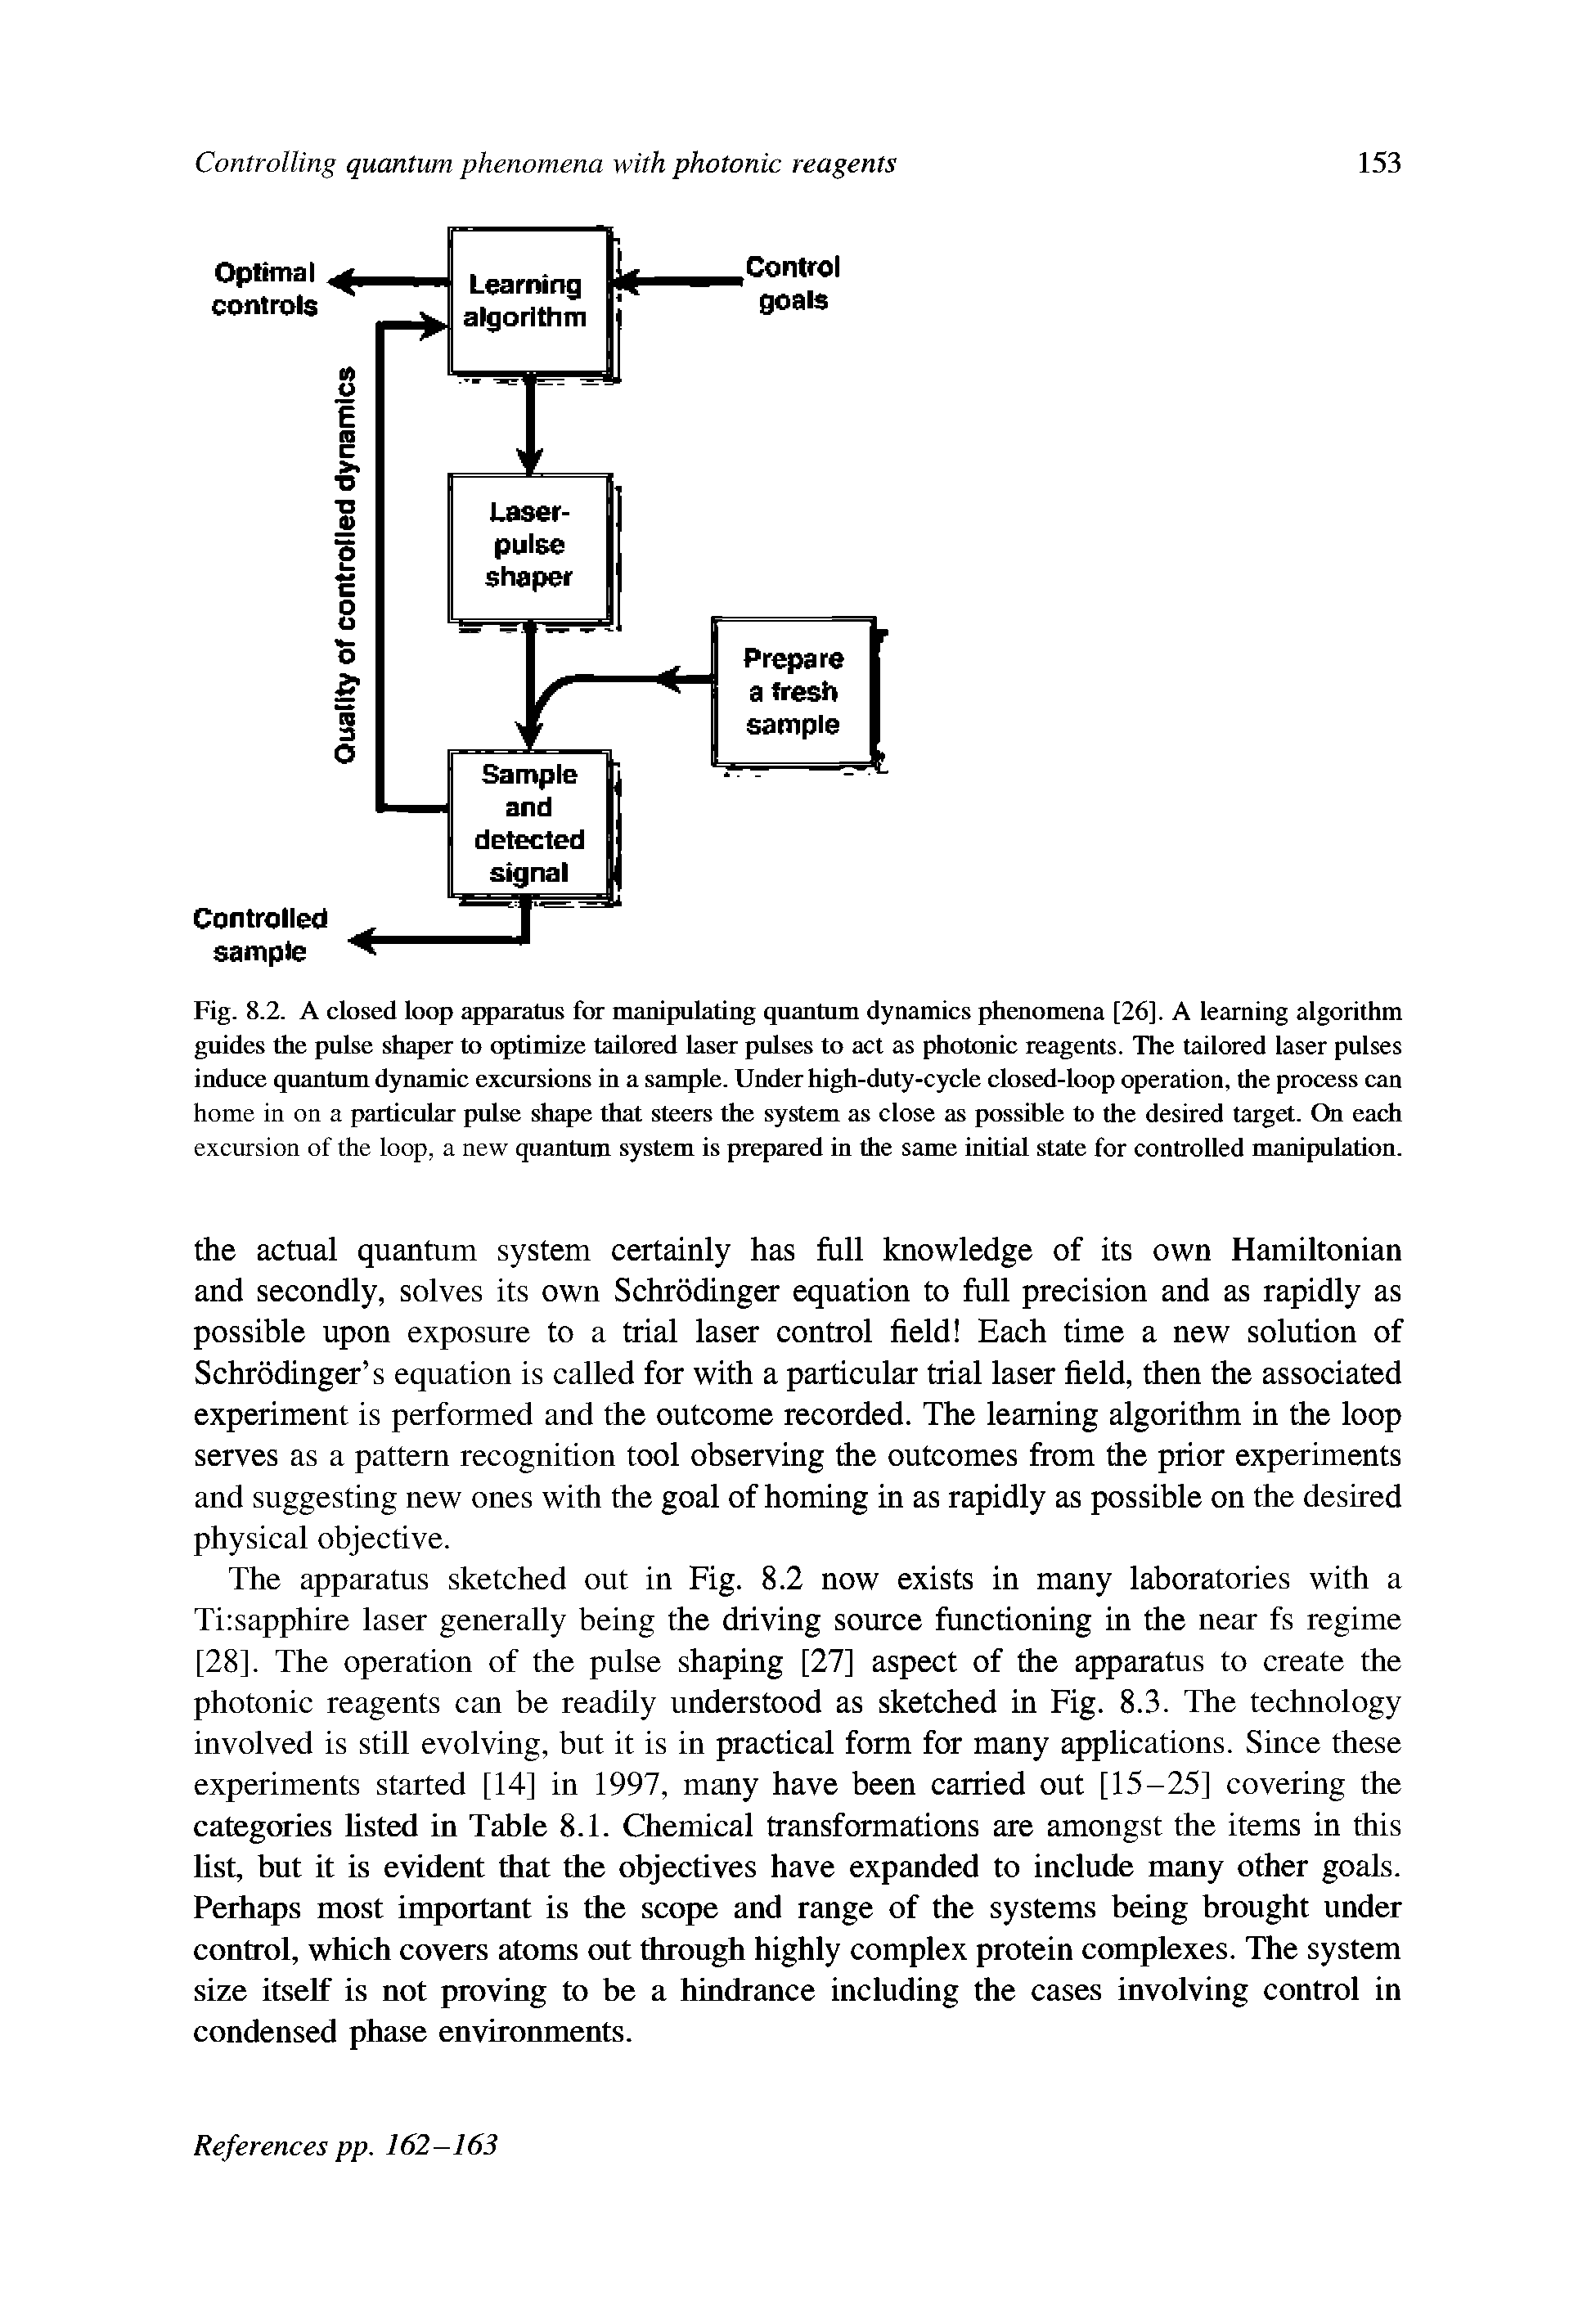 Fig. 8.2. A closed loop apparatus for manipulating quantum dynamics phenomena [26]. A learning algorithm guides the pulse shaper to optimize tailored laser pulses to act as photonic reagents. The tailored laser pulses induce quantum dynamic excursions in a sample. Under high-duty-cycle closed-loop operation, the process can home in on a particular pulse shape that steers the system as close as possible to the desired target. On each excursion of the loop, a new quantum system is prepared in the same initial state for controlled manipulation.